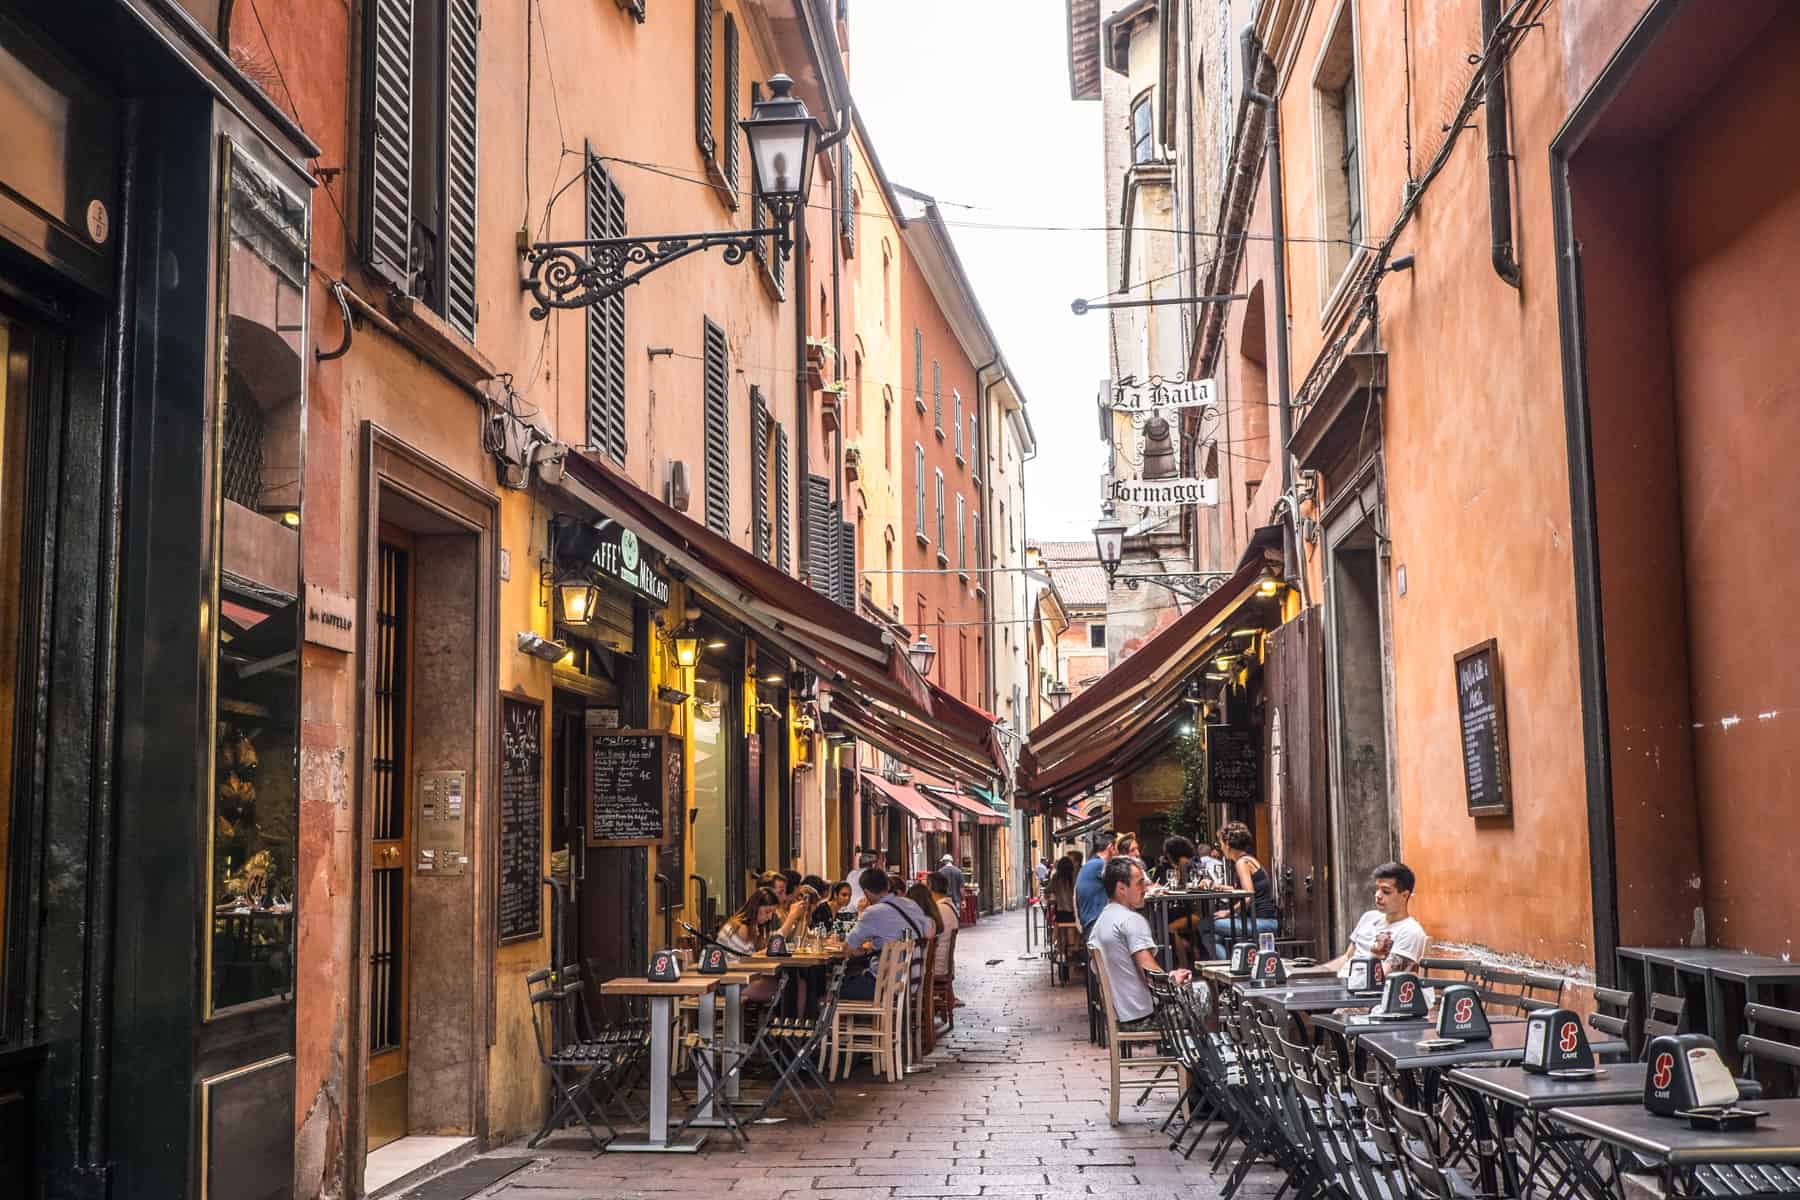 A narrow street in Bologna Italy lined with orange building and filled with tables and chairs and people dining al fresco. 